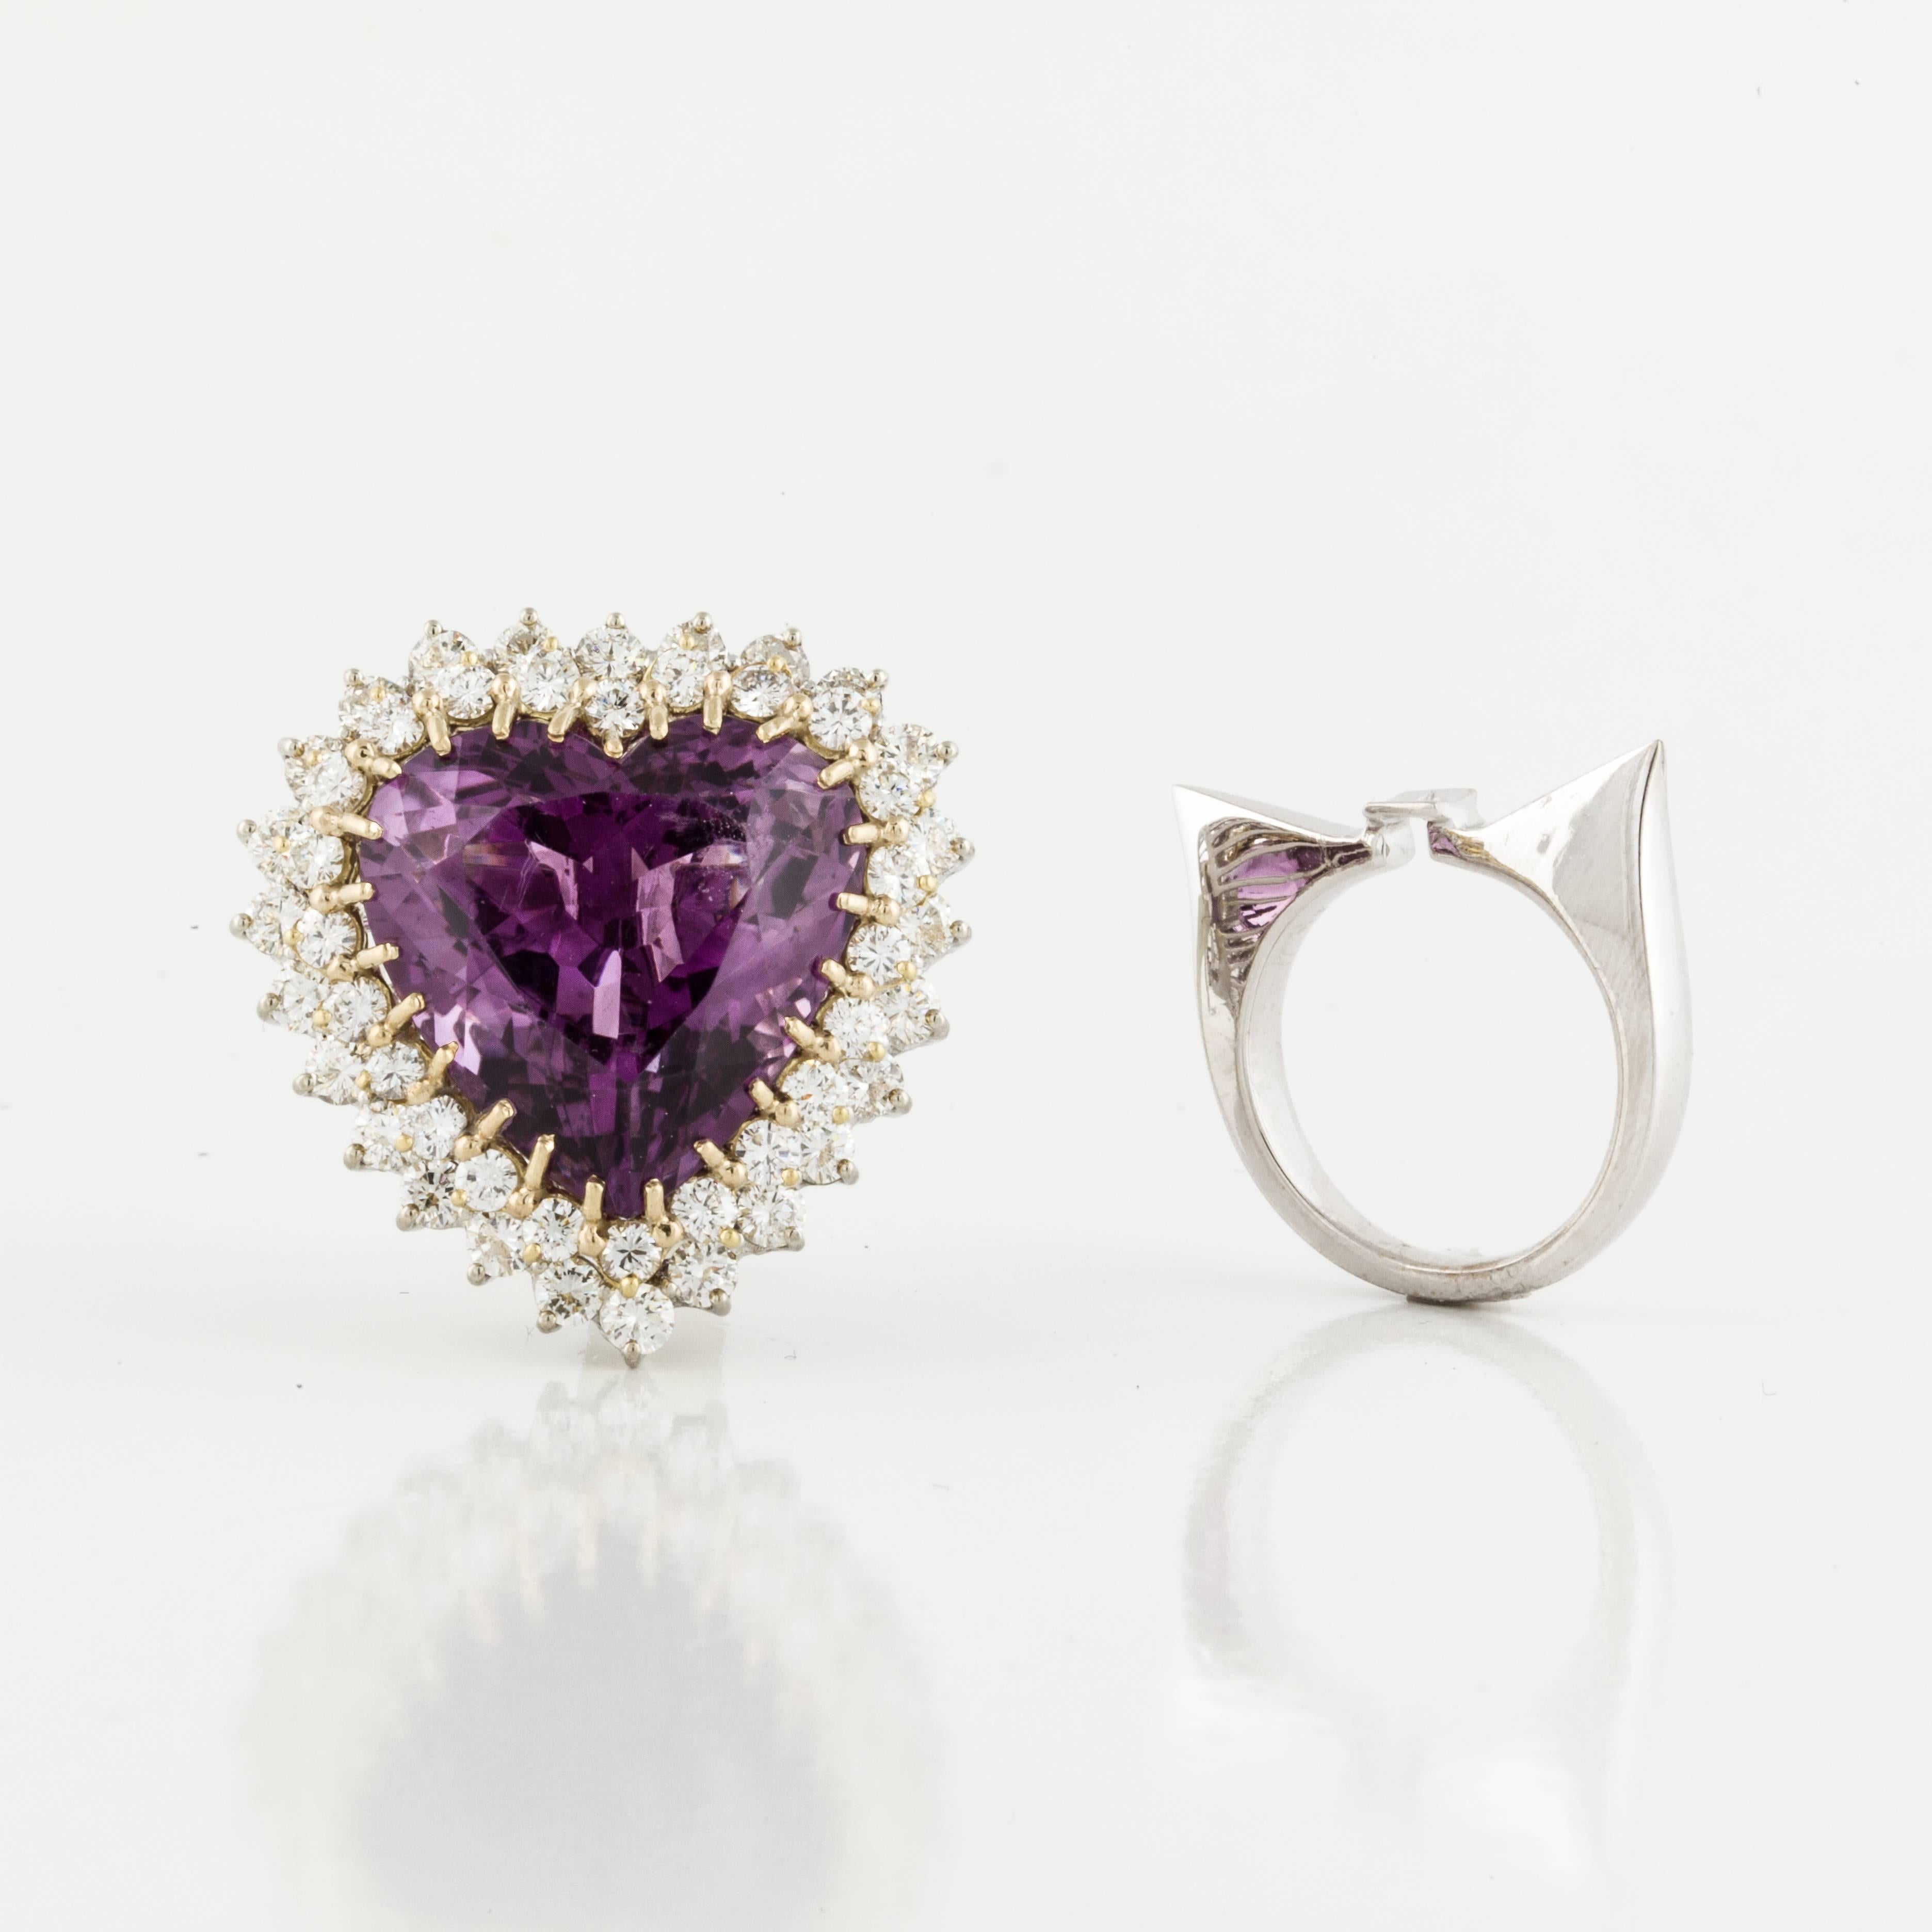 Mixed Cut 27 Carat Heart-Shaped Amethyst and Diamond Ring/Pendant in 18K Gold